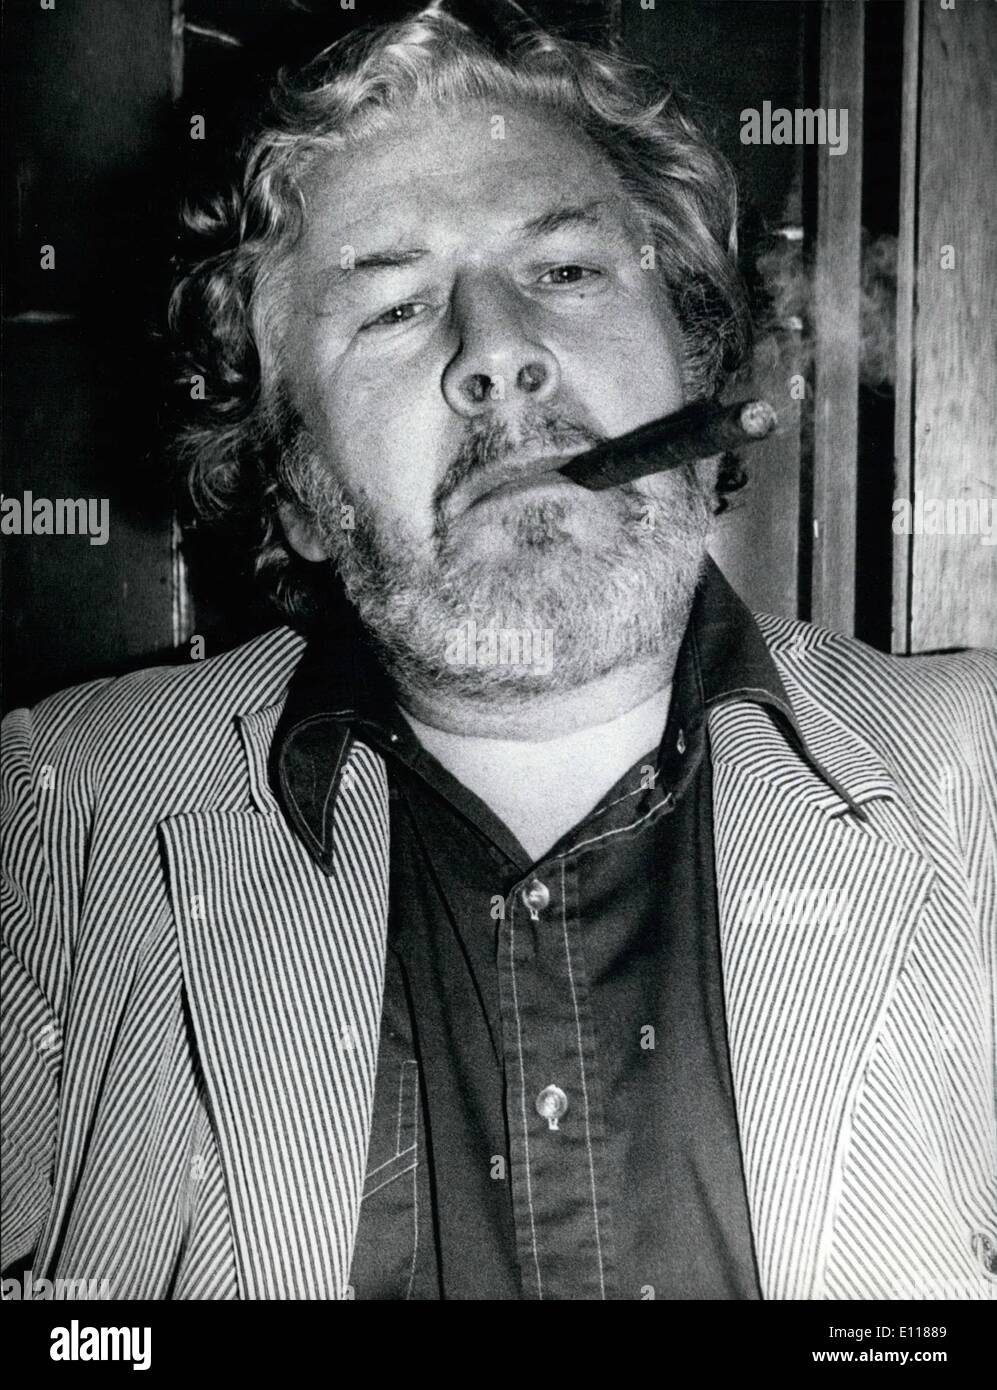 Apr. 04, 1976 - PETER USTINOV WILL BECOME 55 YEARS OLD - On April 16th 1976, PETER USTINOV (picture) will celebrate his 55th birthday. He was born 1921 in London as the son of a Russian immigrant, a wellknown art-critic, and a French. Early, Peter Ustinov began to get interested in stageplay. After having visited the Westminister School, he studied at the Theatro Studio in London; Since then he is an actor on stages and in films. At the age of 19. Peter Ustinov wrote his first play, of Sorrow'' about the situation of an immigrant which was successfully performed at the London CLub in 1942. Stock Photo